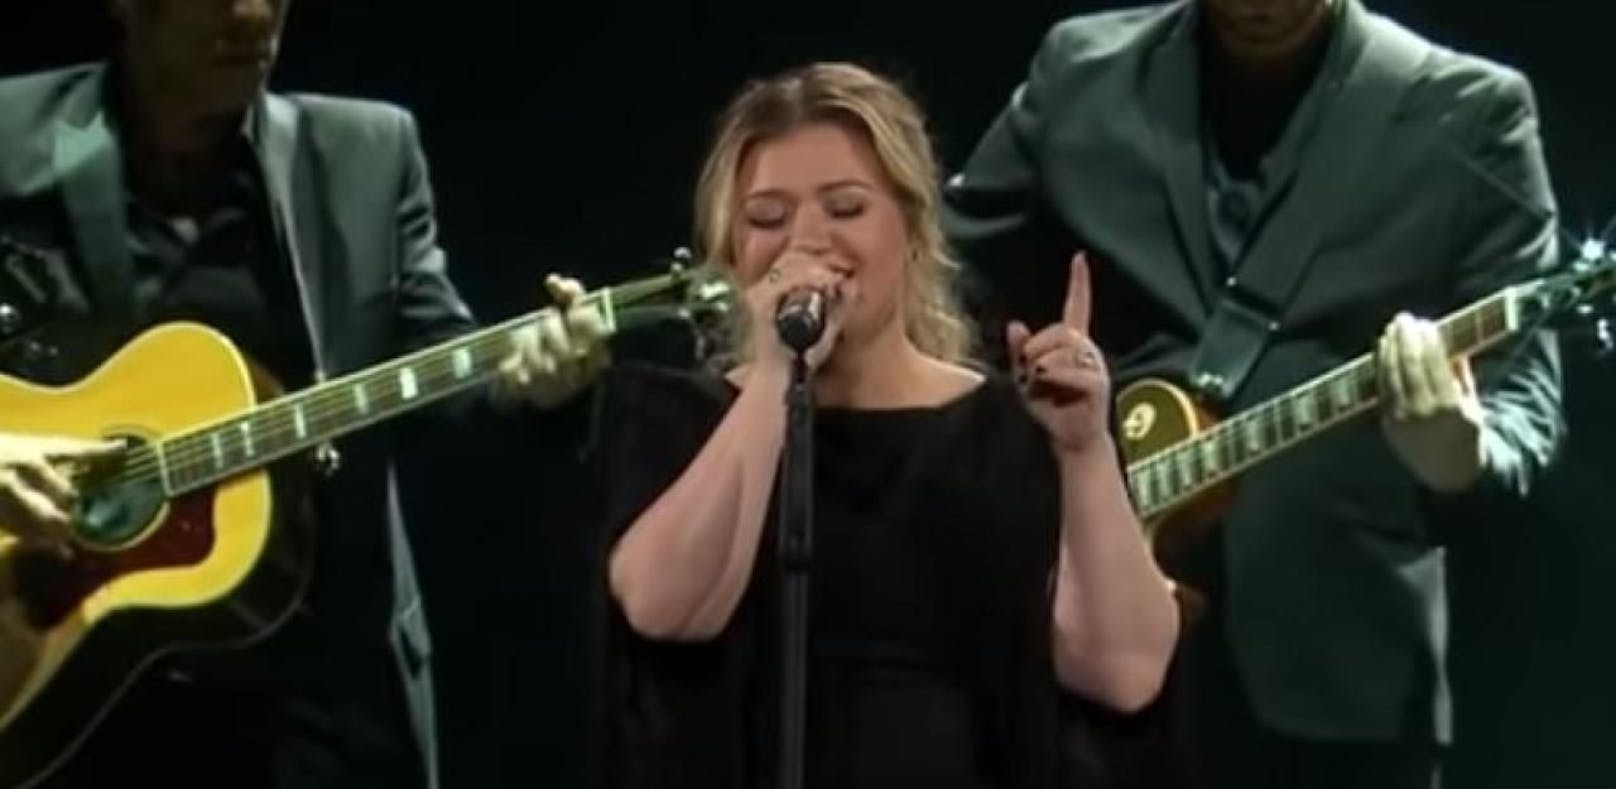 Kelly Clarkson begeistert live mit "Shallow"-Cover